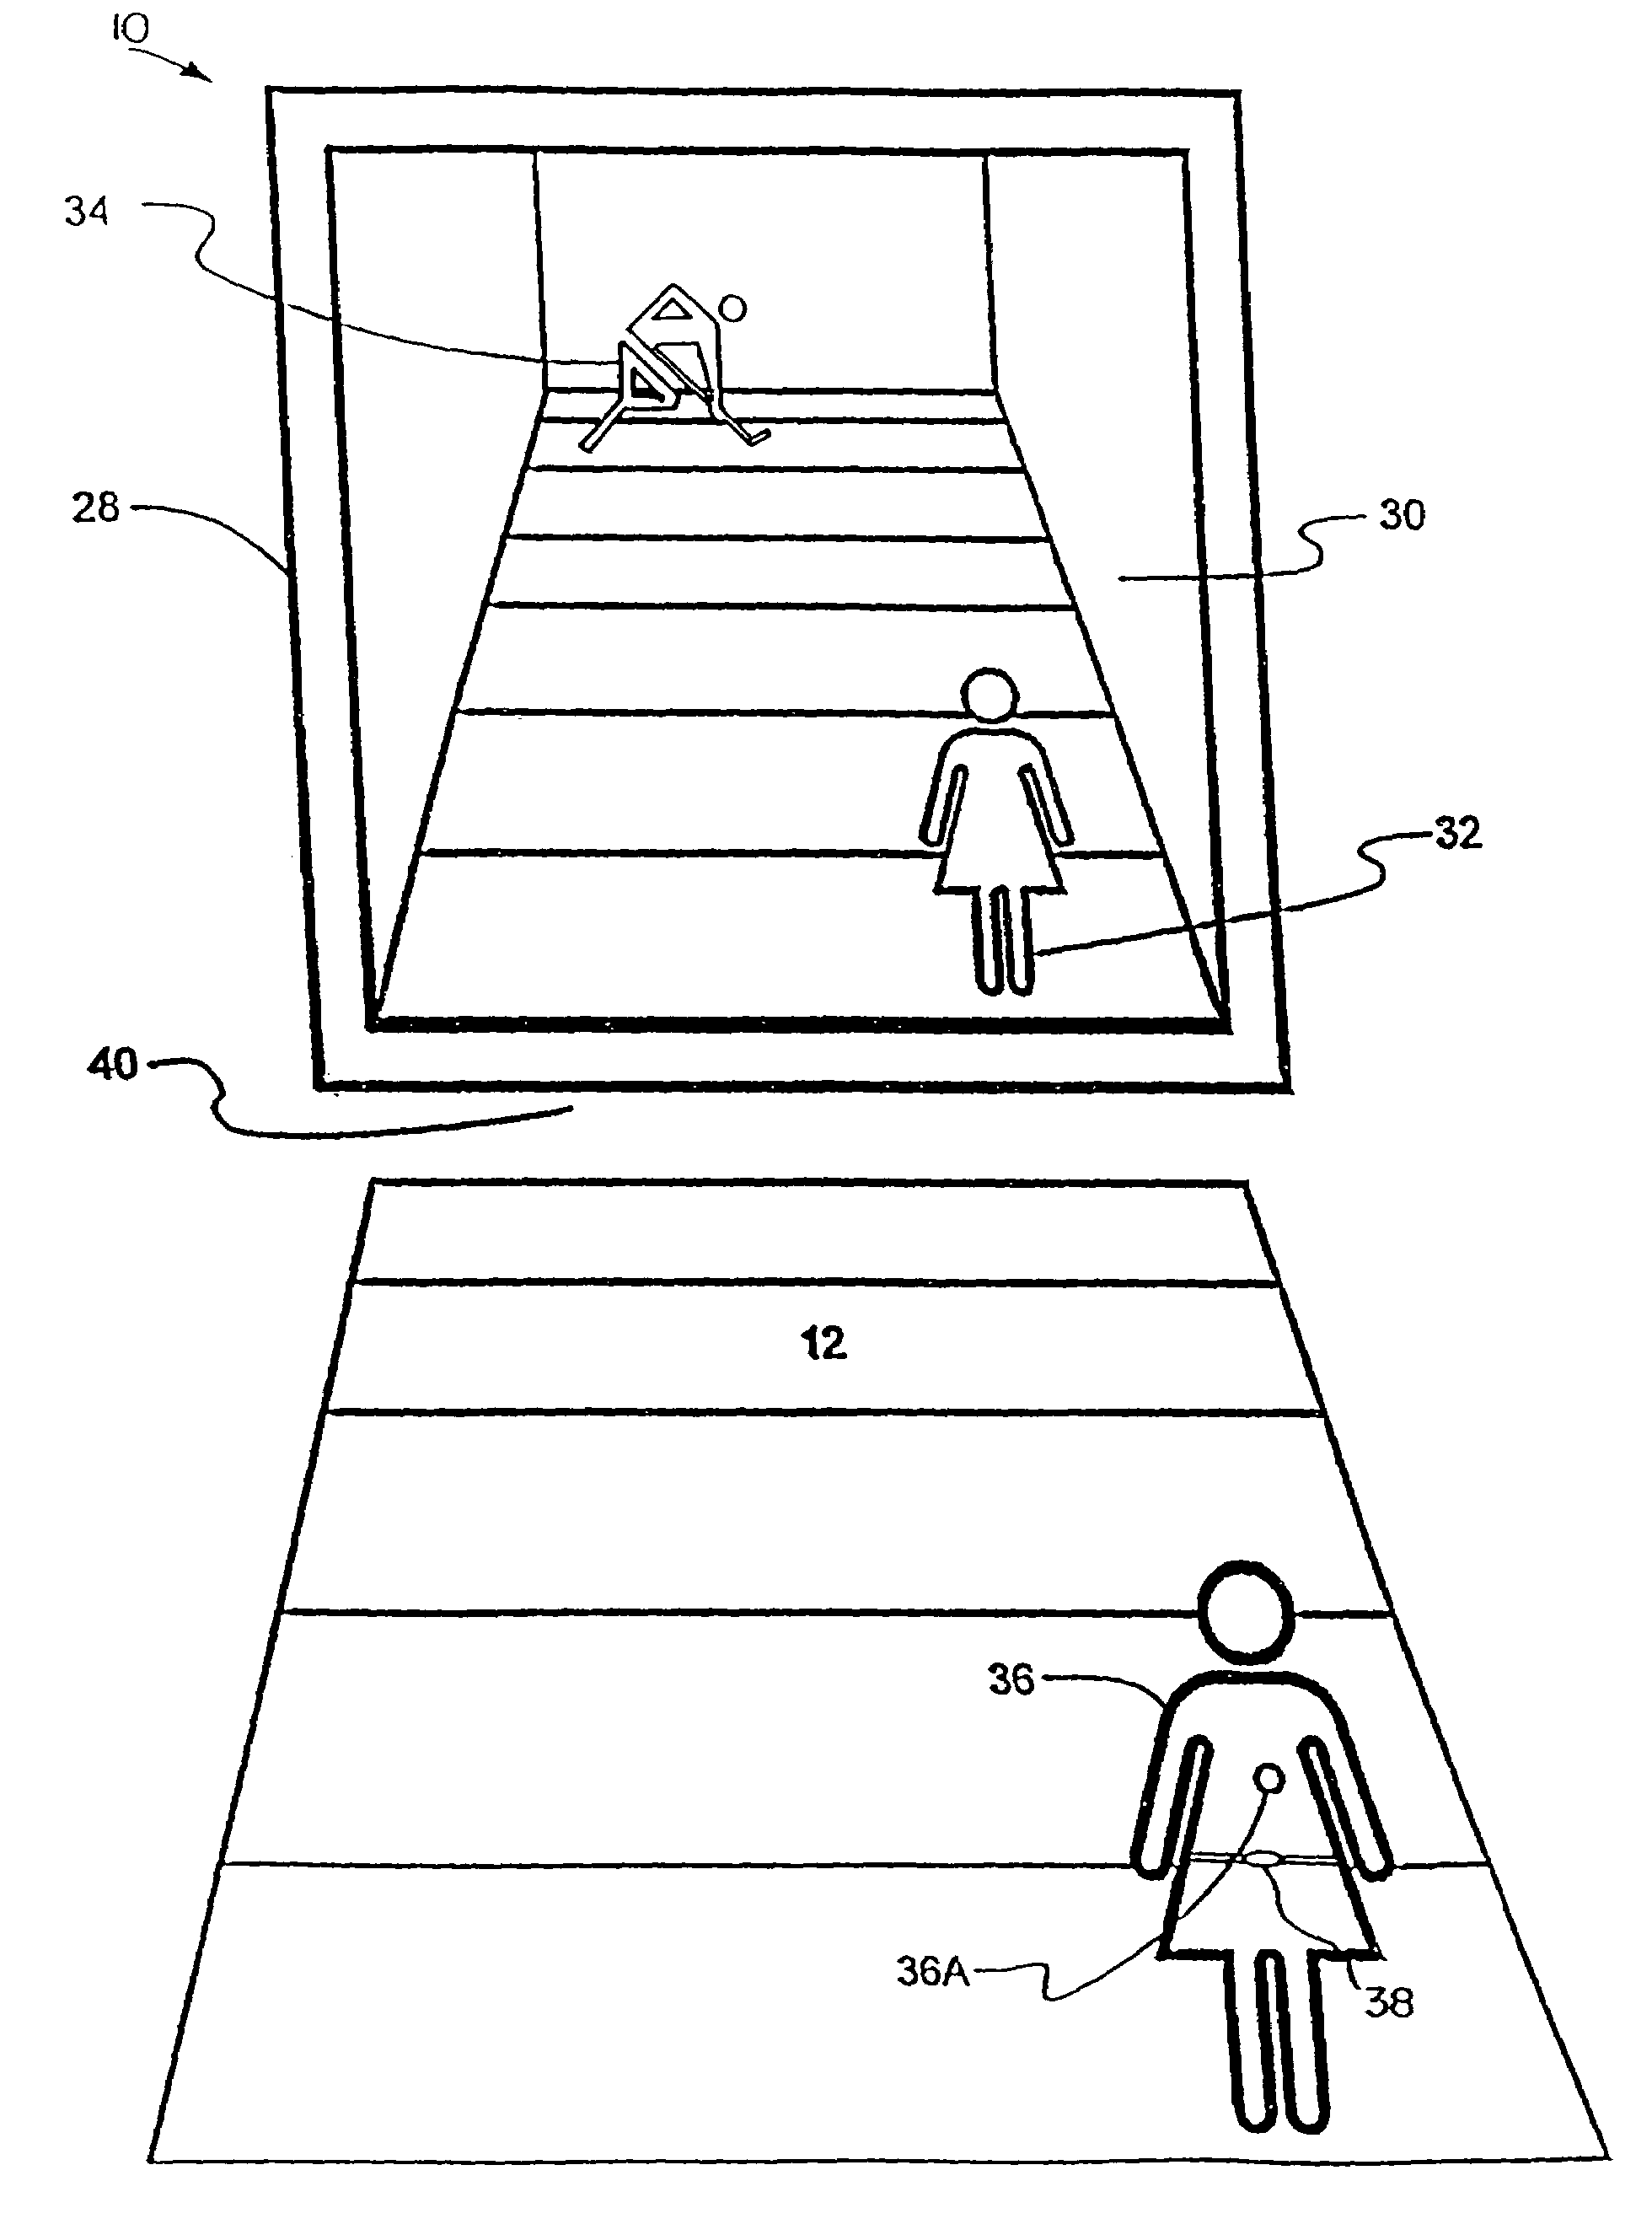 System and method for tracking and assessing movement skills in multidimensional space